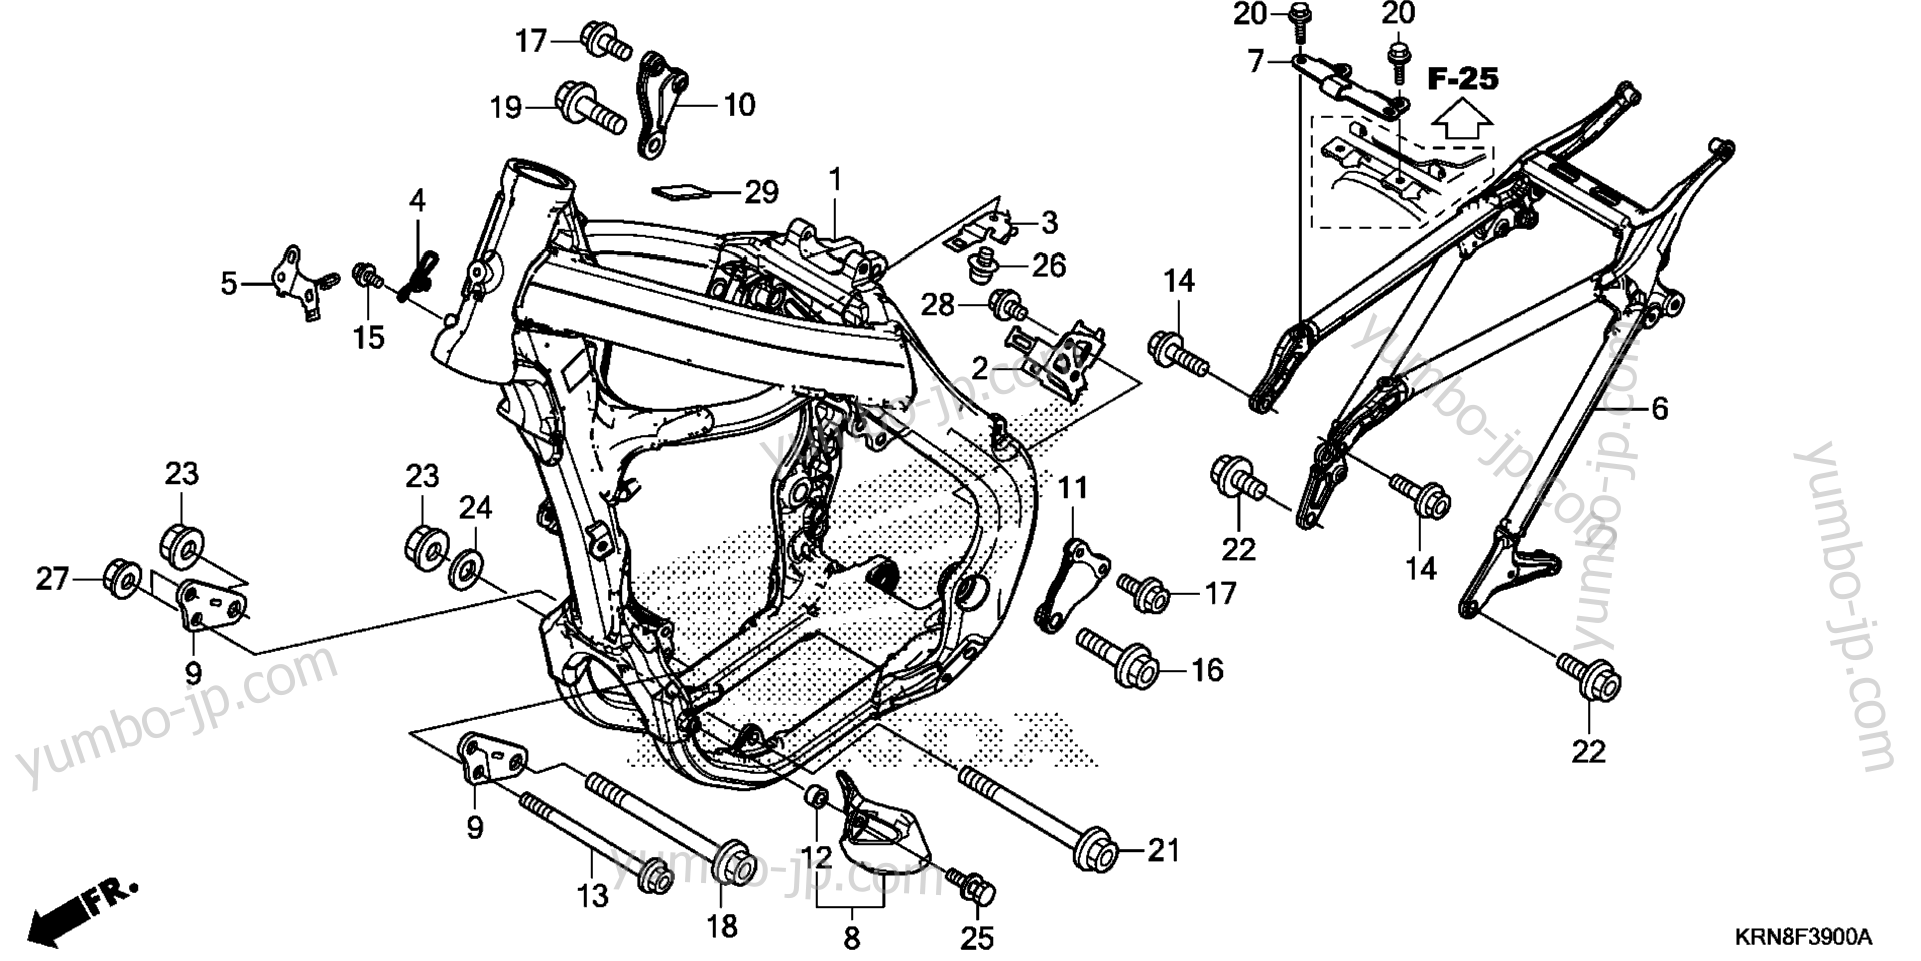 FRAME for motorcycles HONDA CRF250R AC 2015 year